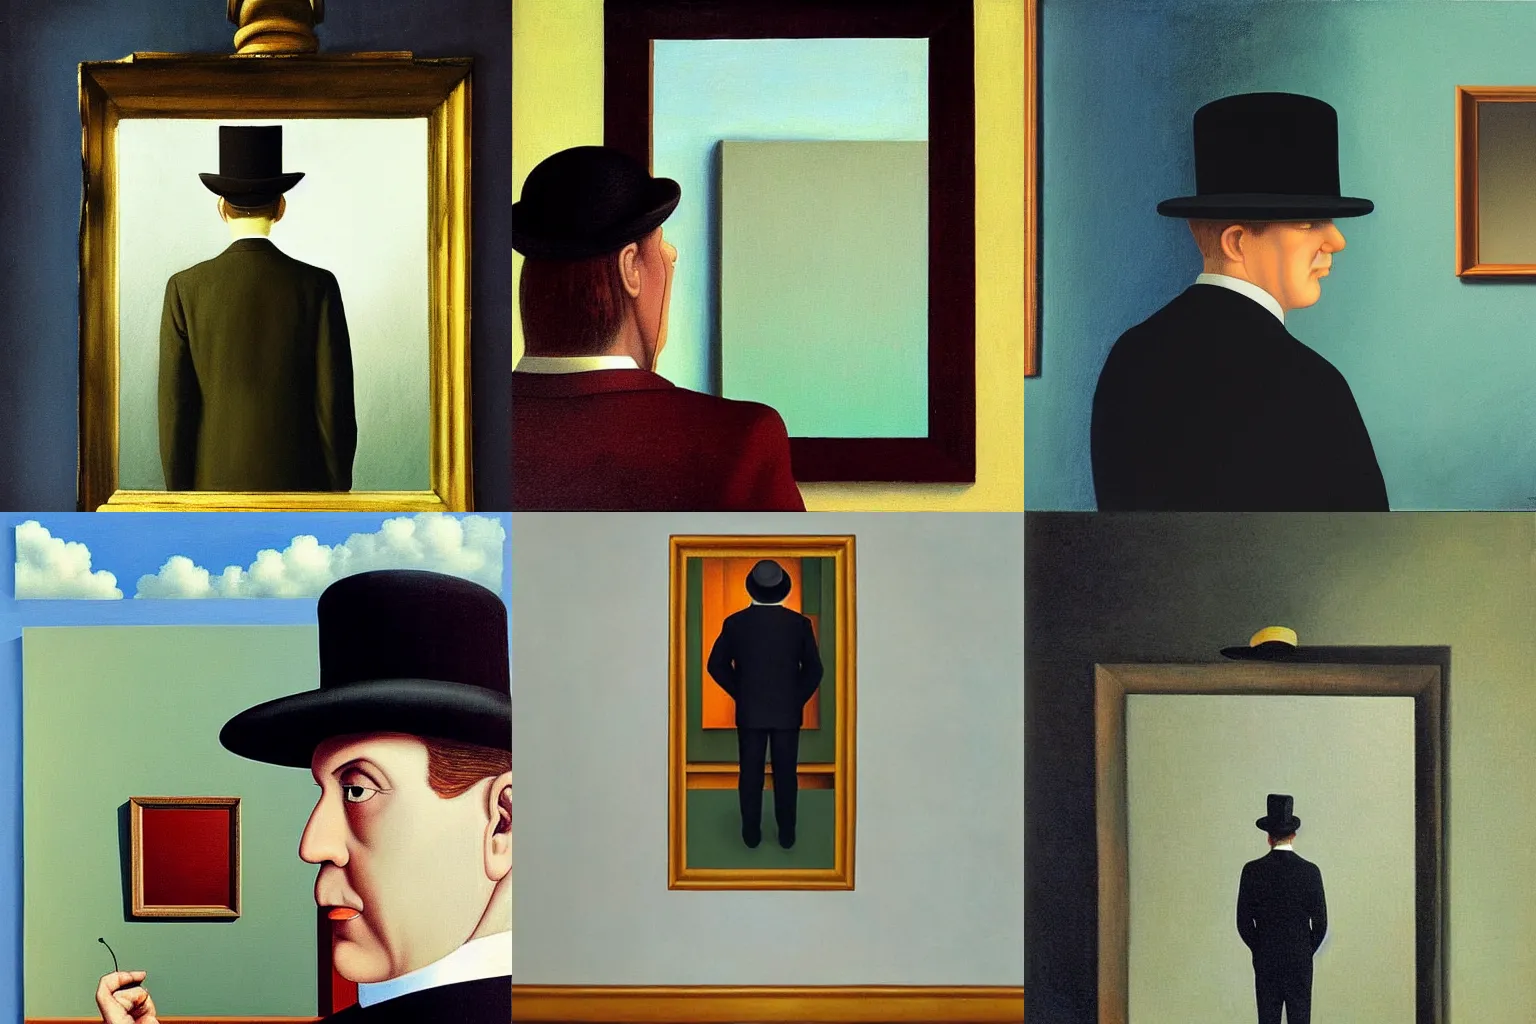 Prompt: “painting of apple in front of mirror and image of man wearing bowler hat looking out from mirror, by Magritte”